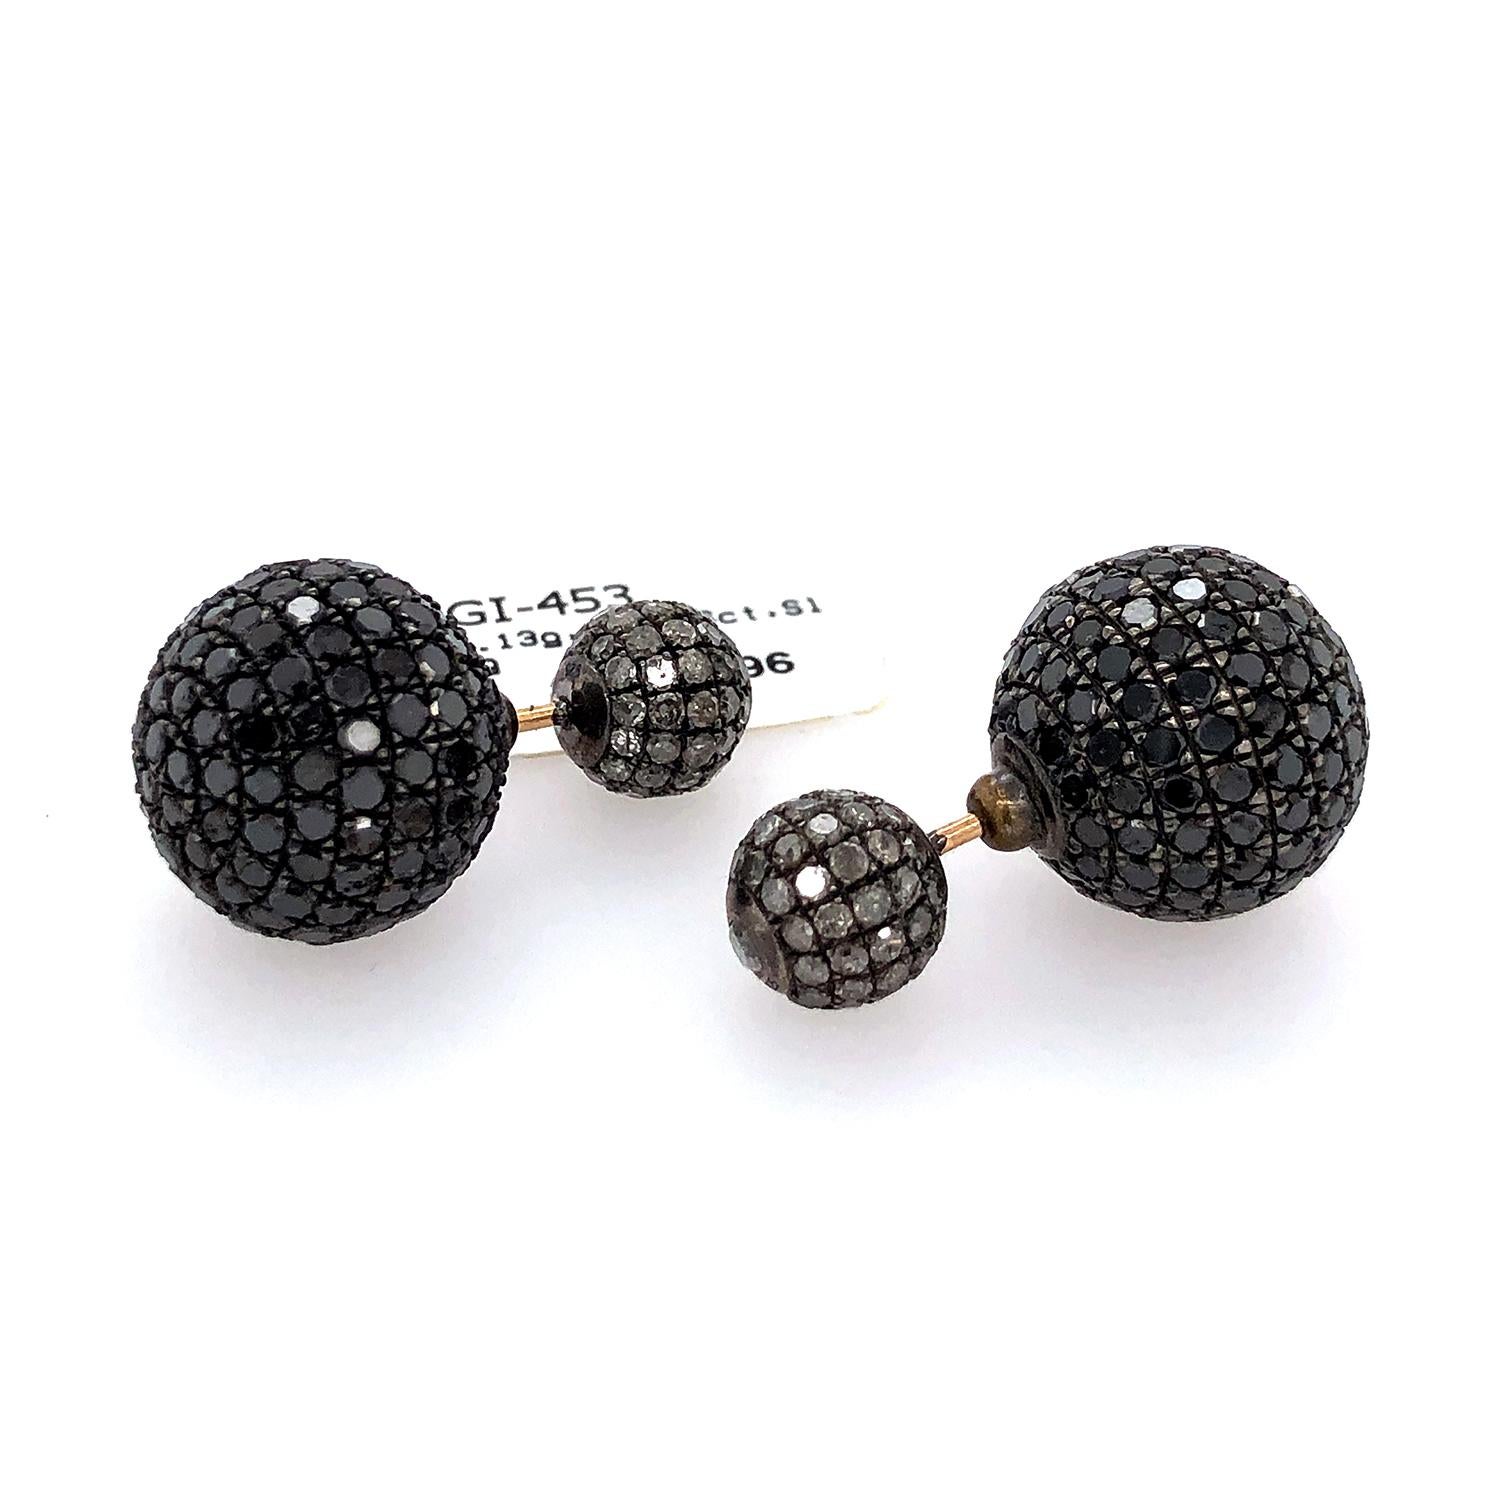 Mixed Cut Pave Diamond Ball Tunnel Earrings Made in 18k Gold & Silver For Sale